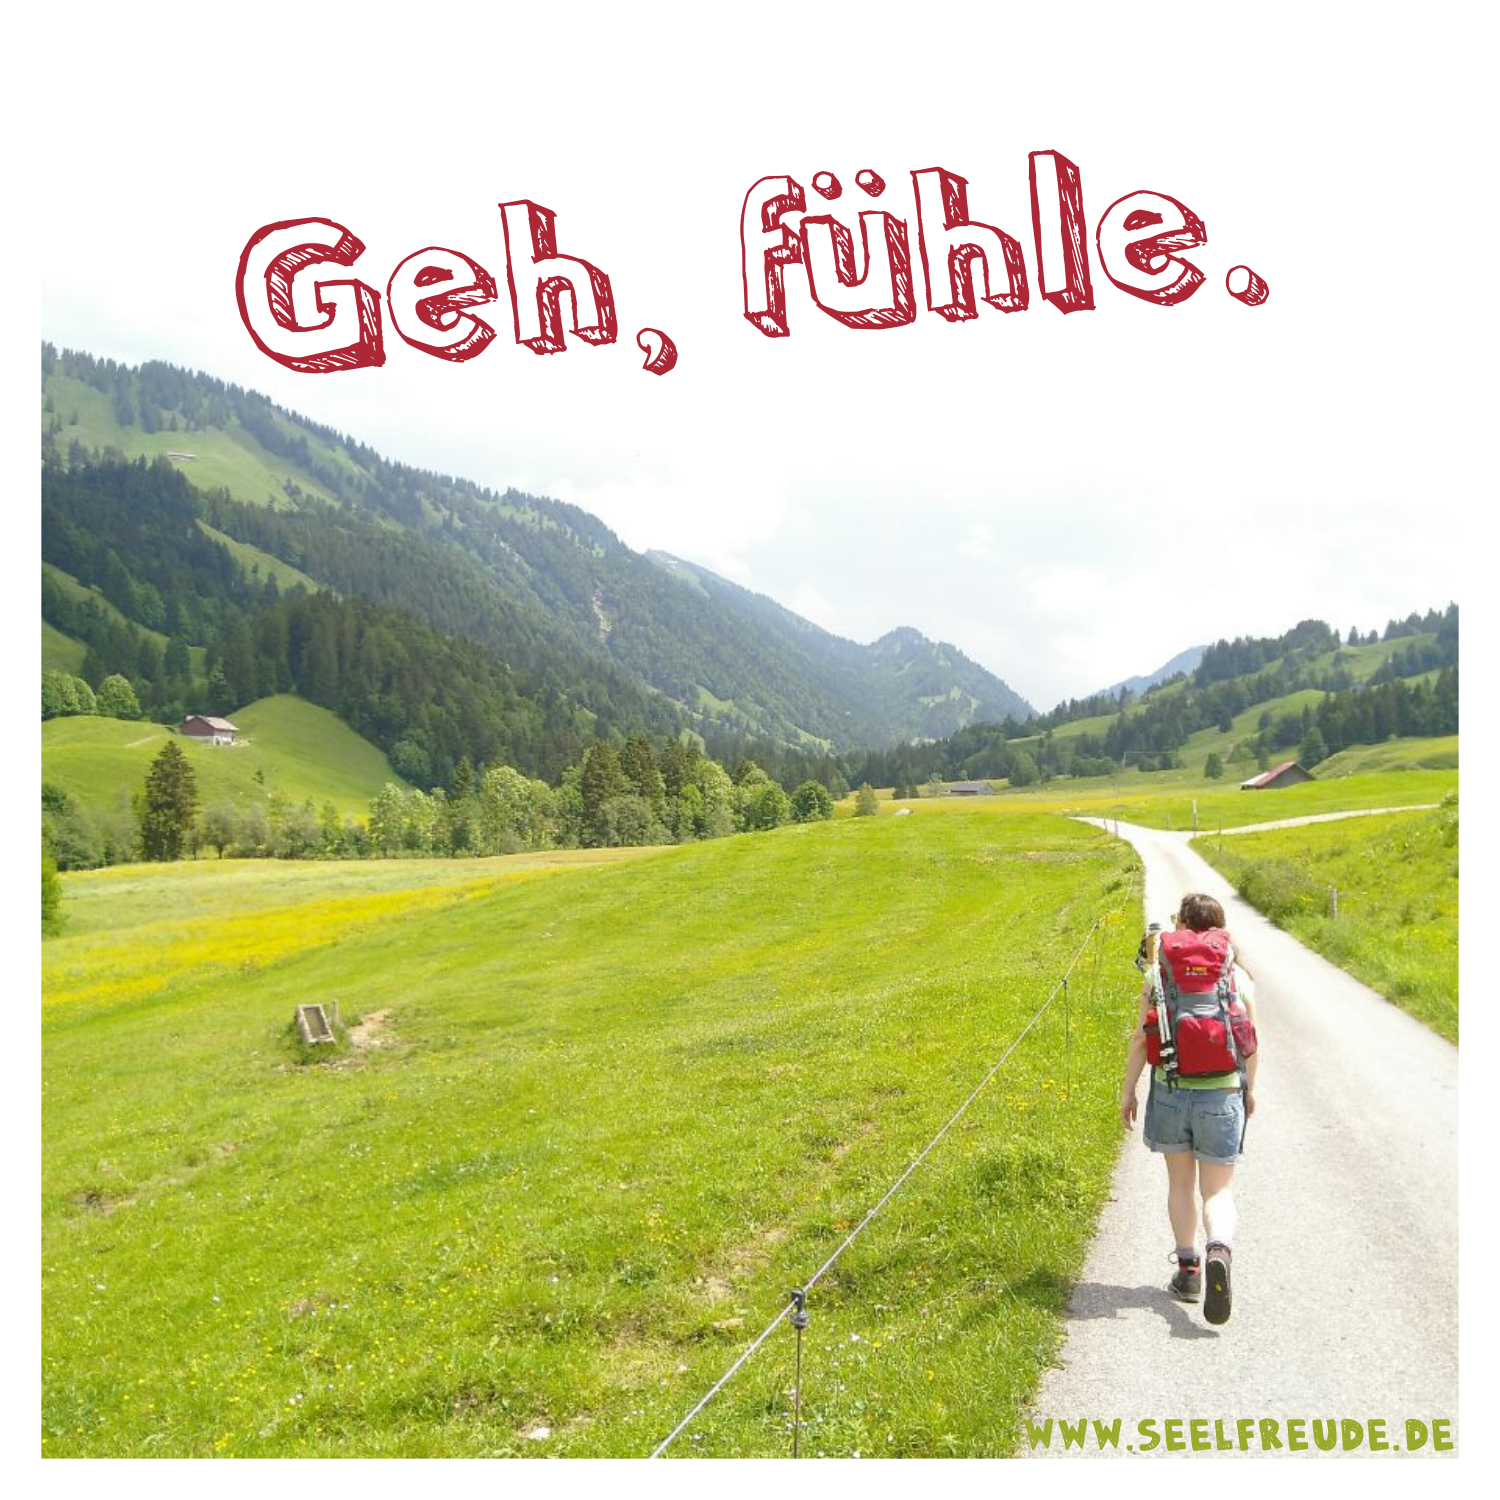 Read more about the article Geh, fühle.